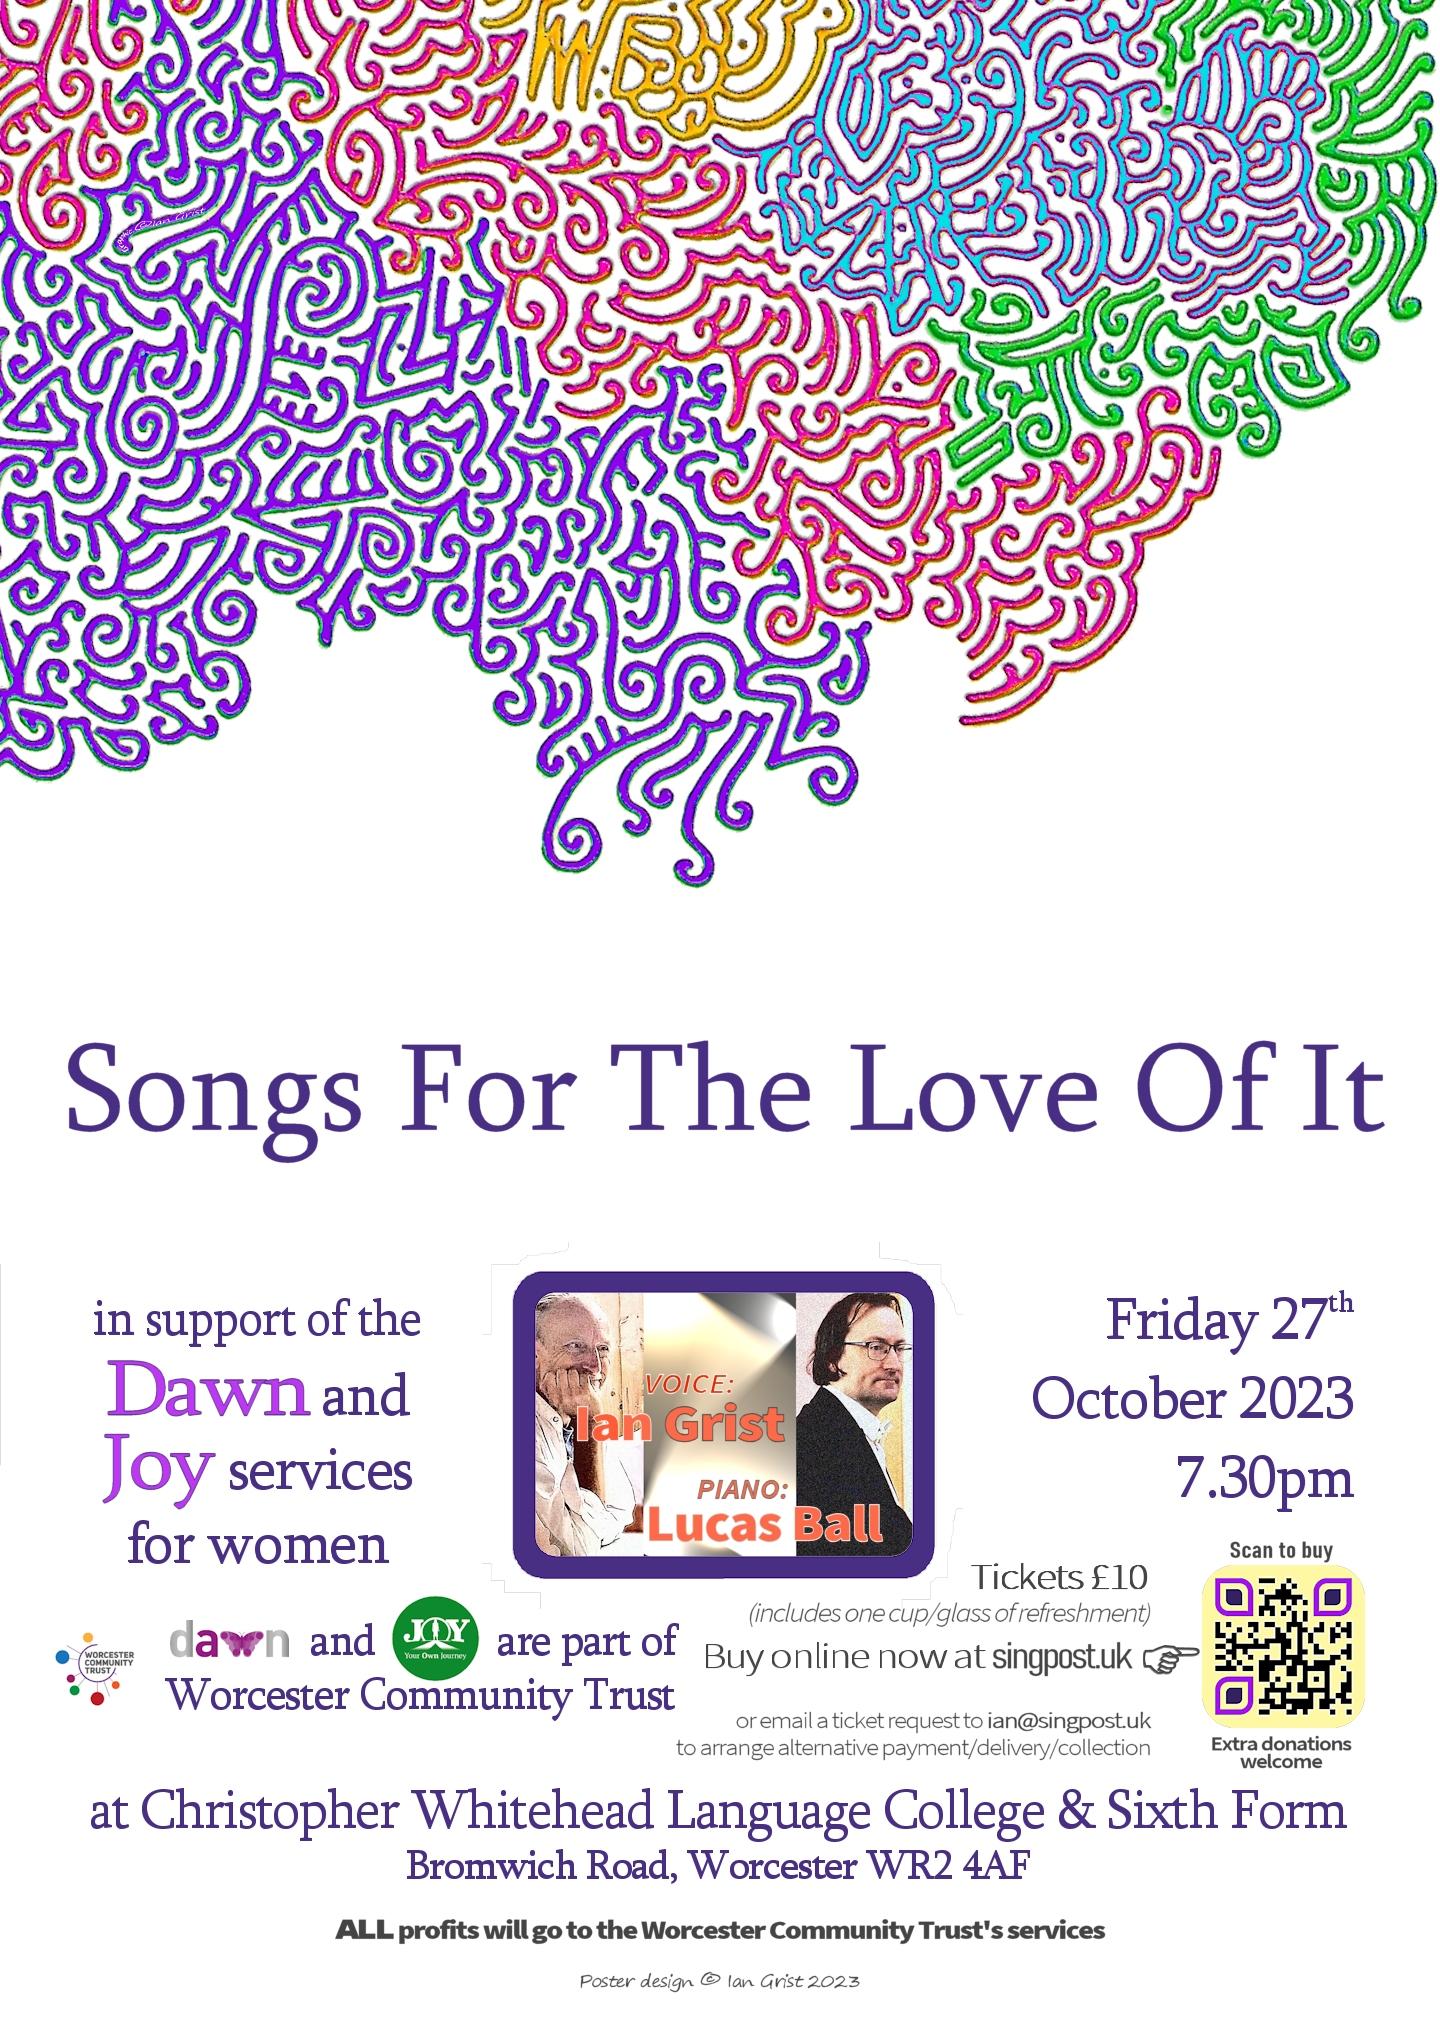 Songs for the love of it poster